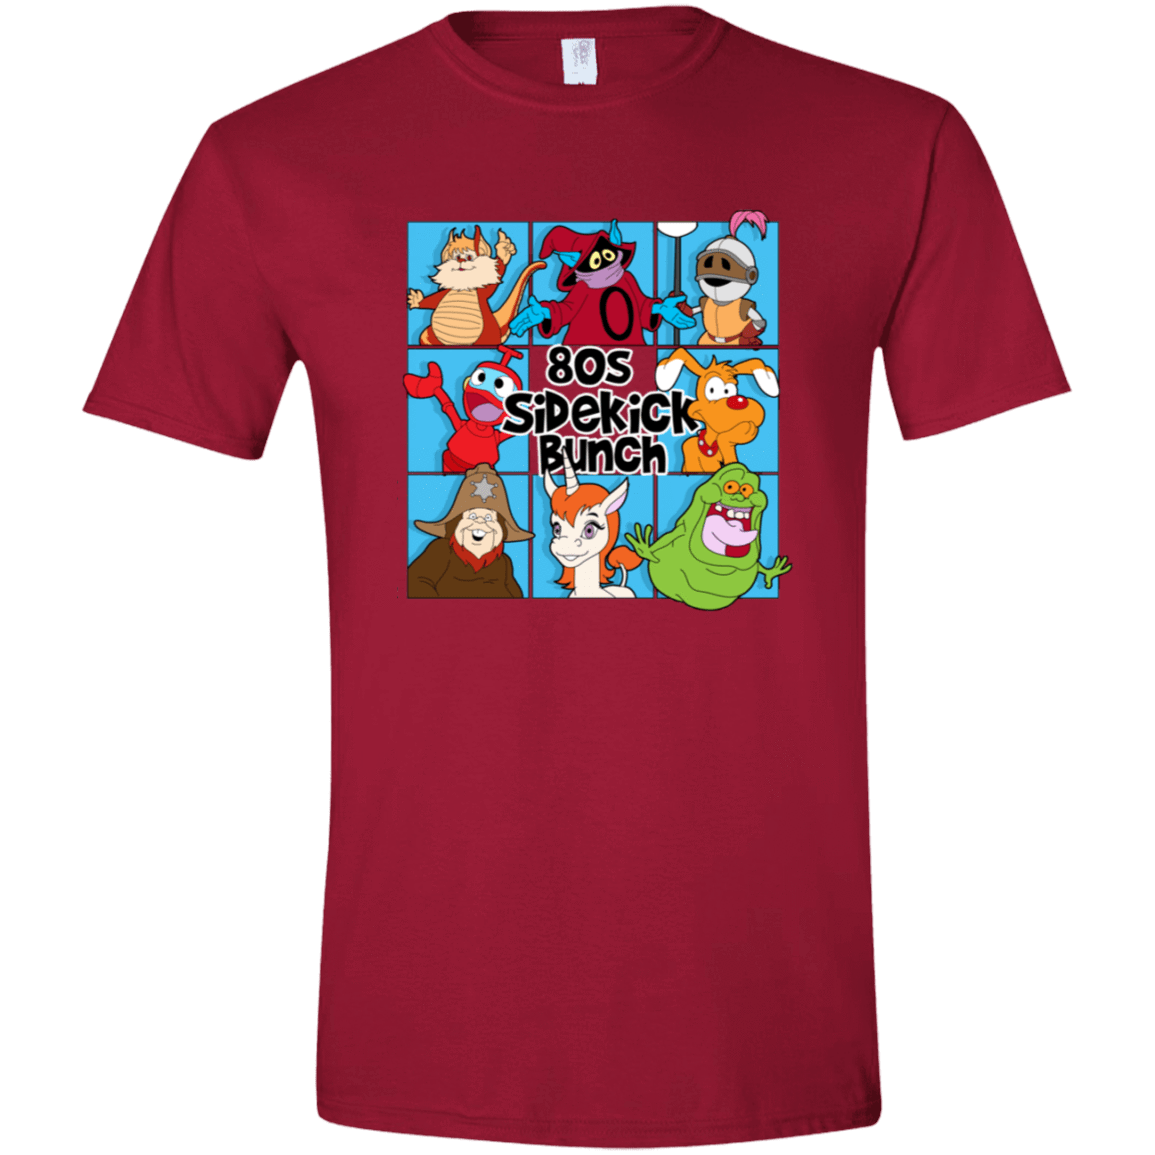 T-Shirts Cardinal Red / S 80s Sidekick Bunch Men's Semi-Fitted Softstyle